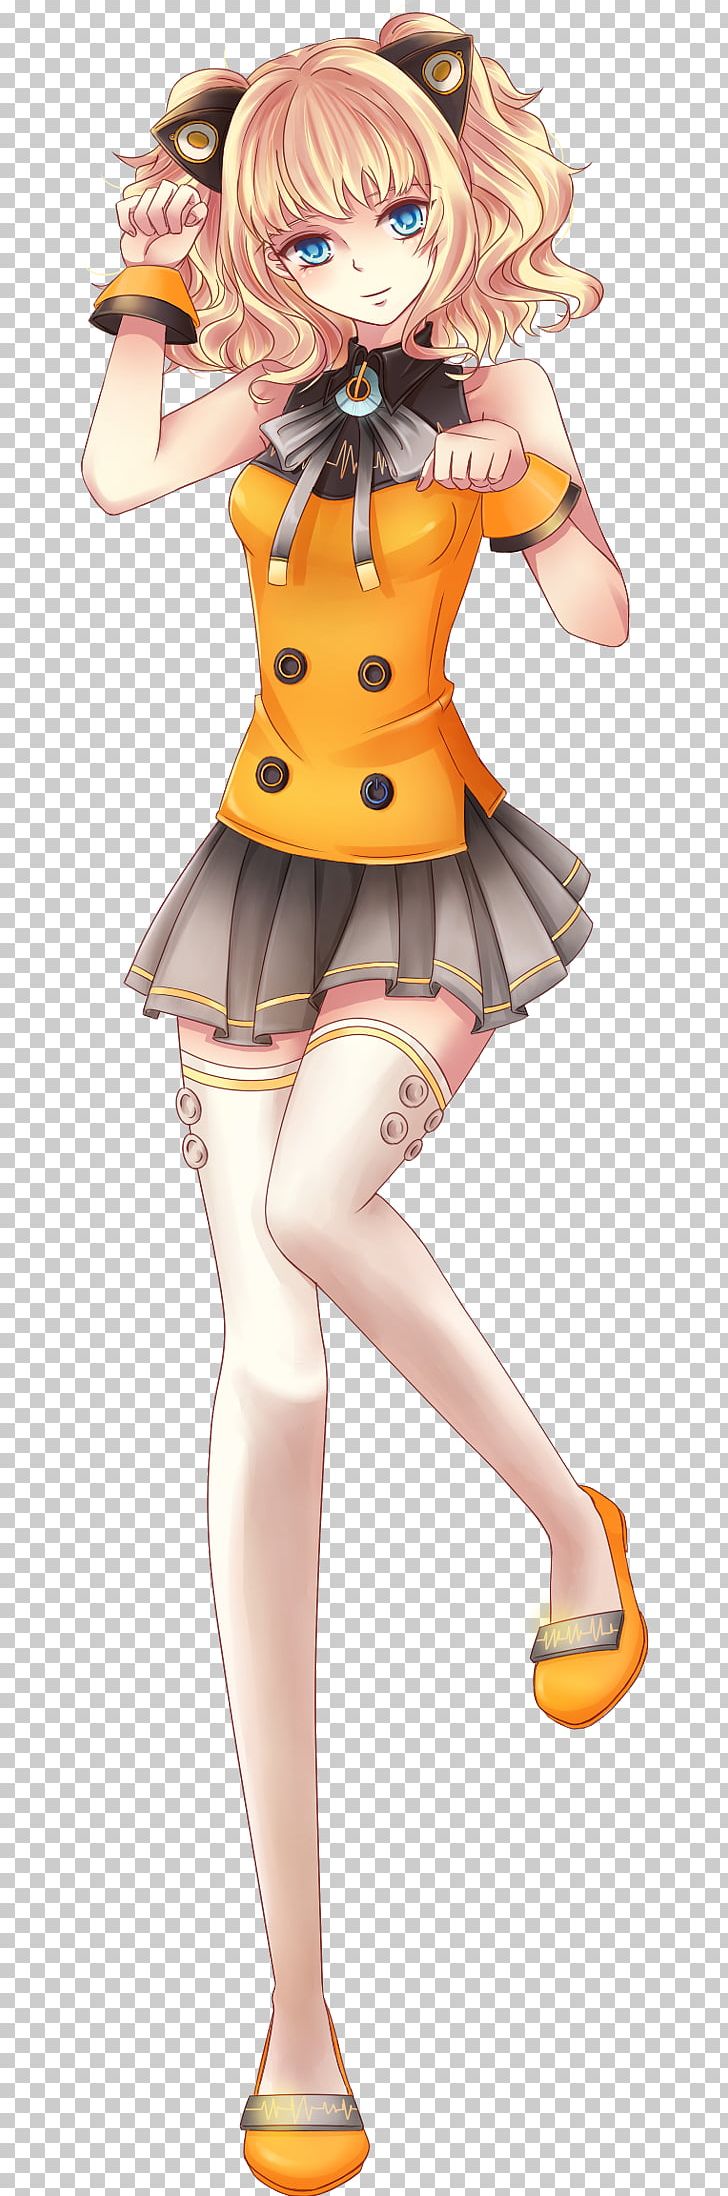 SeeU Vocaloid Anime Drawing Manga PNG, Clipart, Anime, Brown Hair, Cartoon, Catgirl, Character Free PNG Download